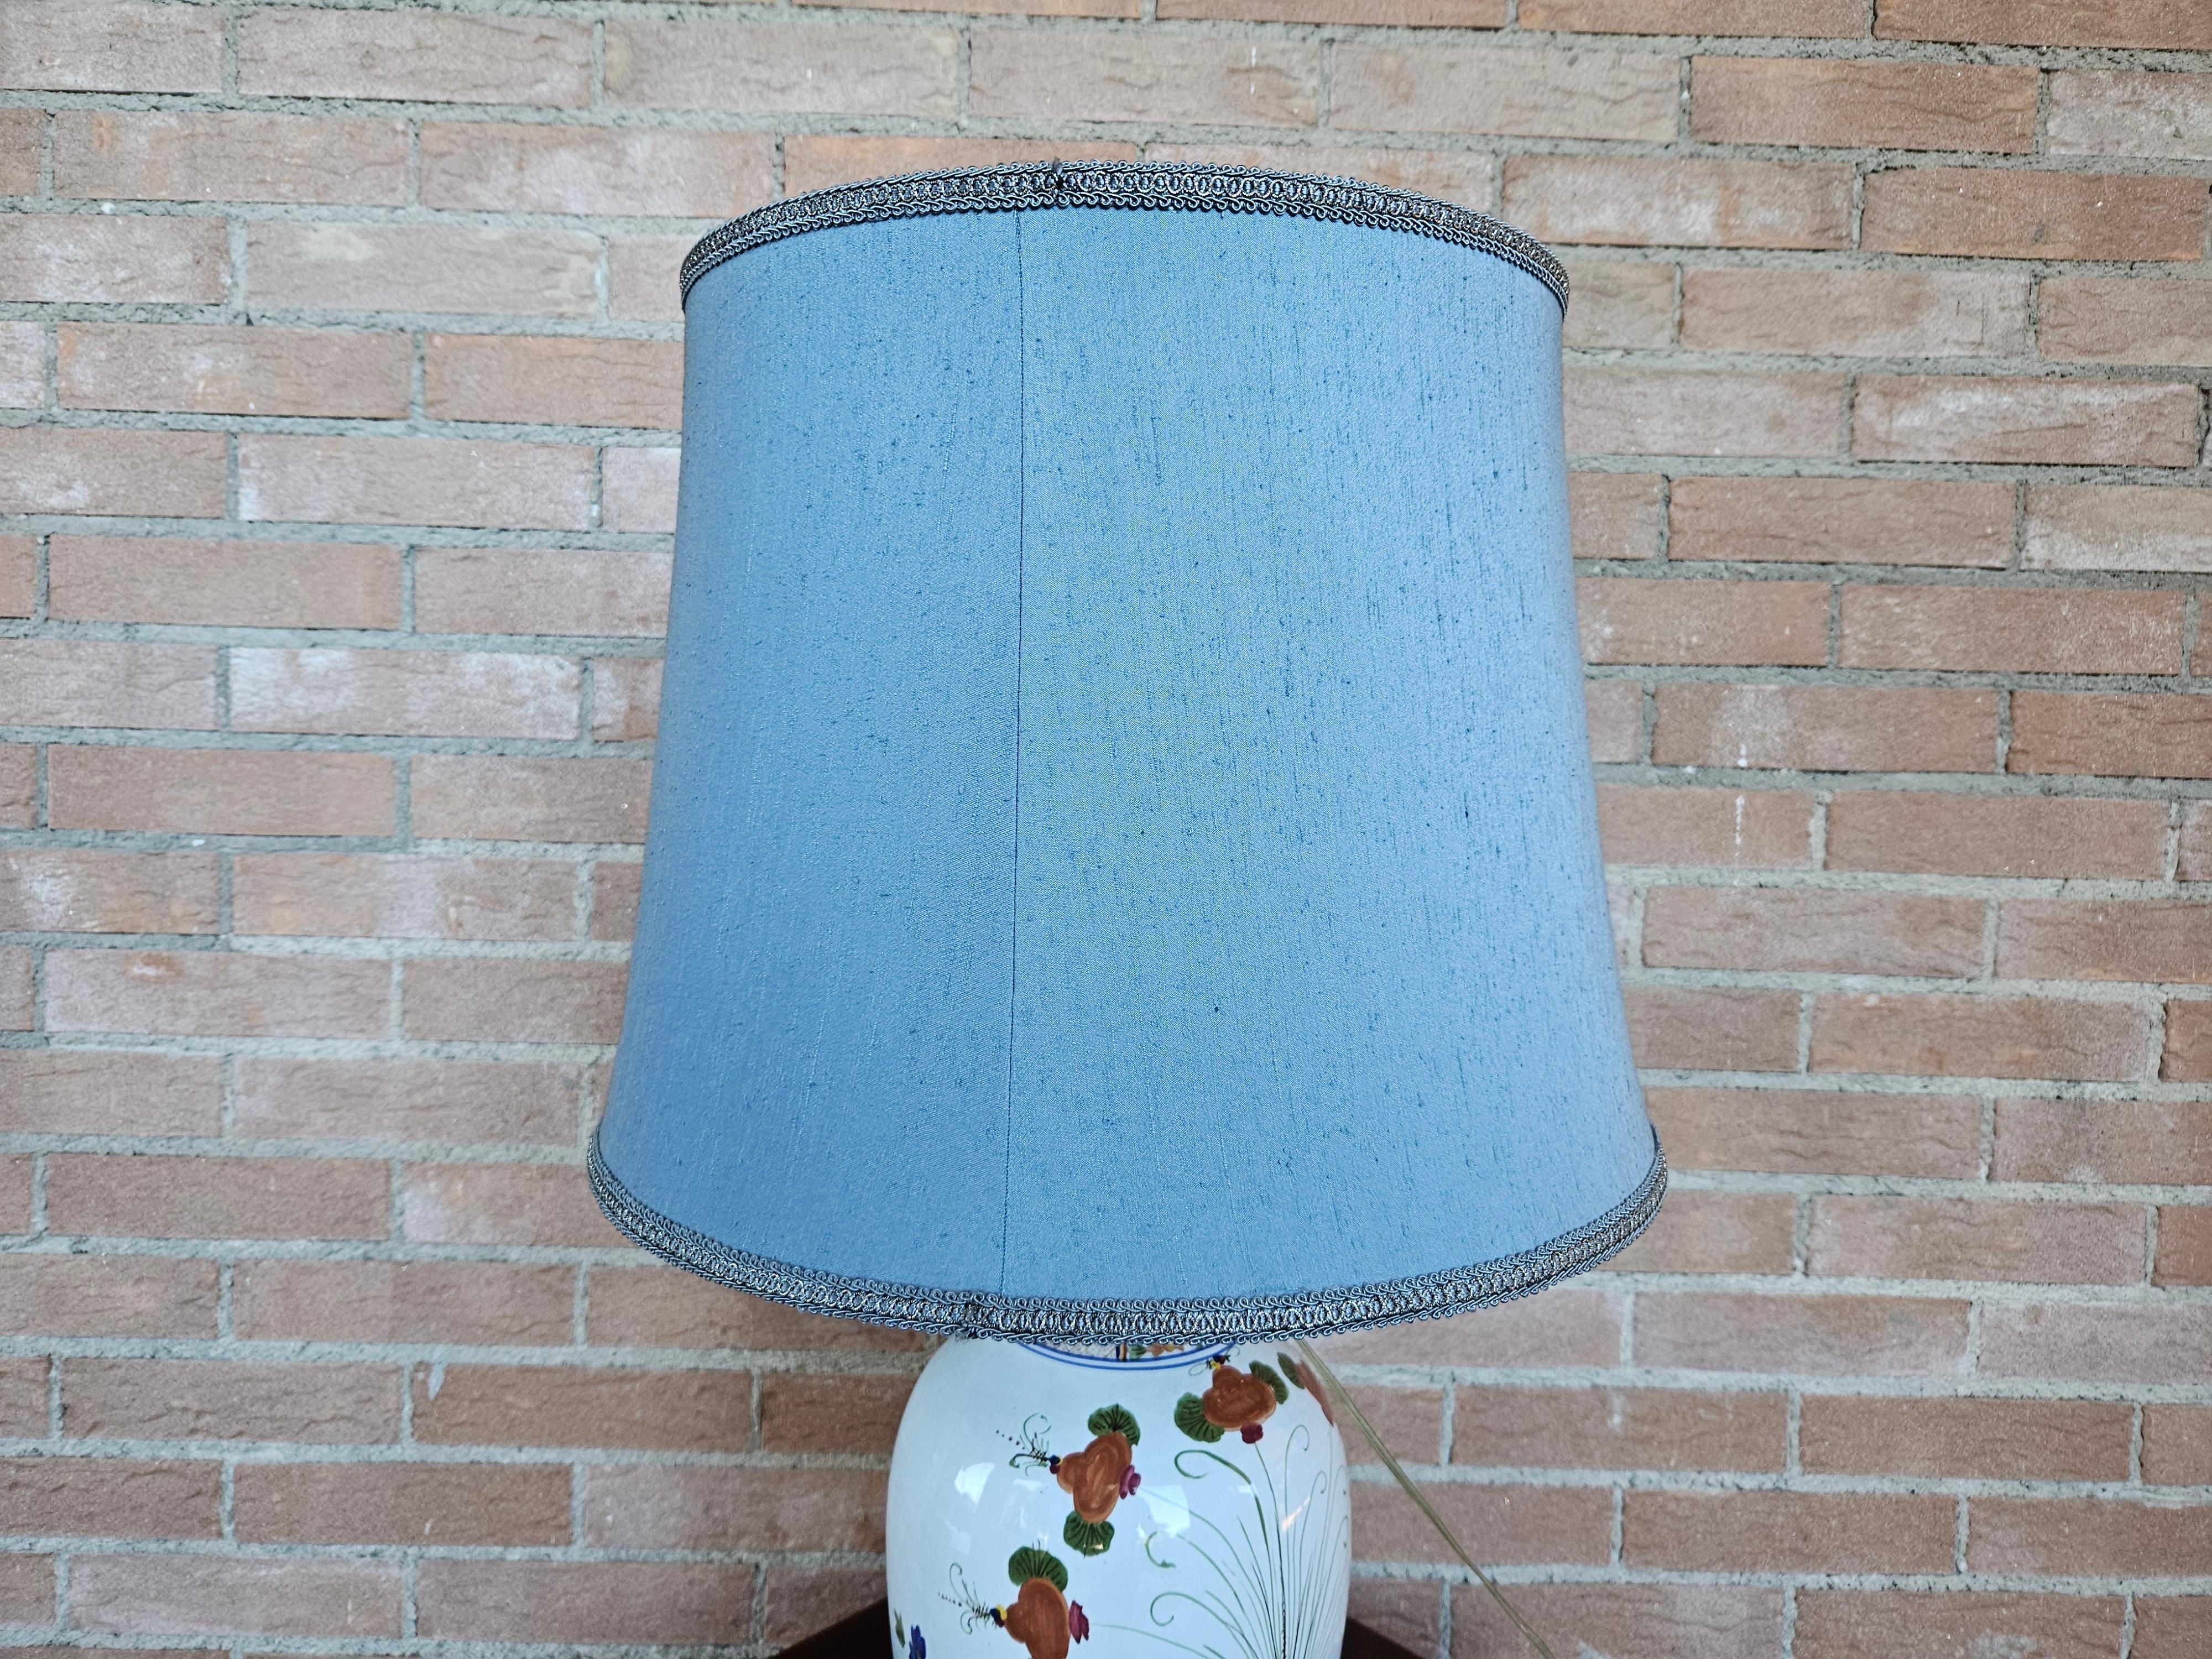 Large ceramic table lamp decorated with floral work and light blue/blue fabric shade.

Bulb not included.